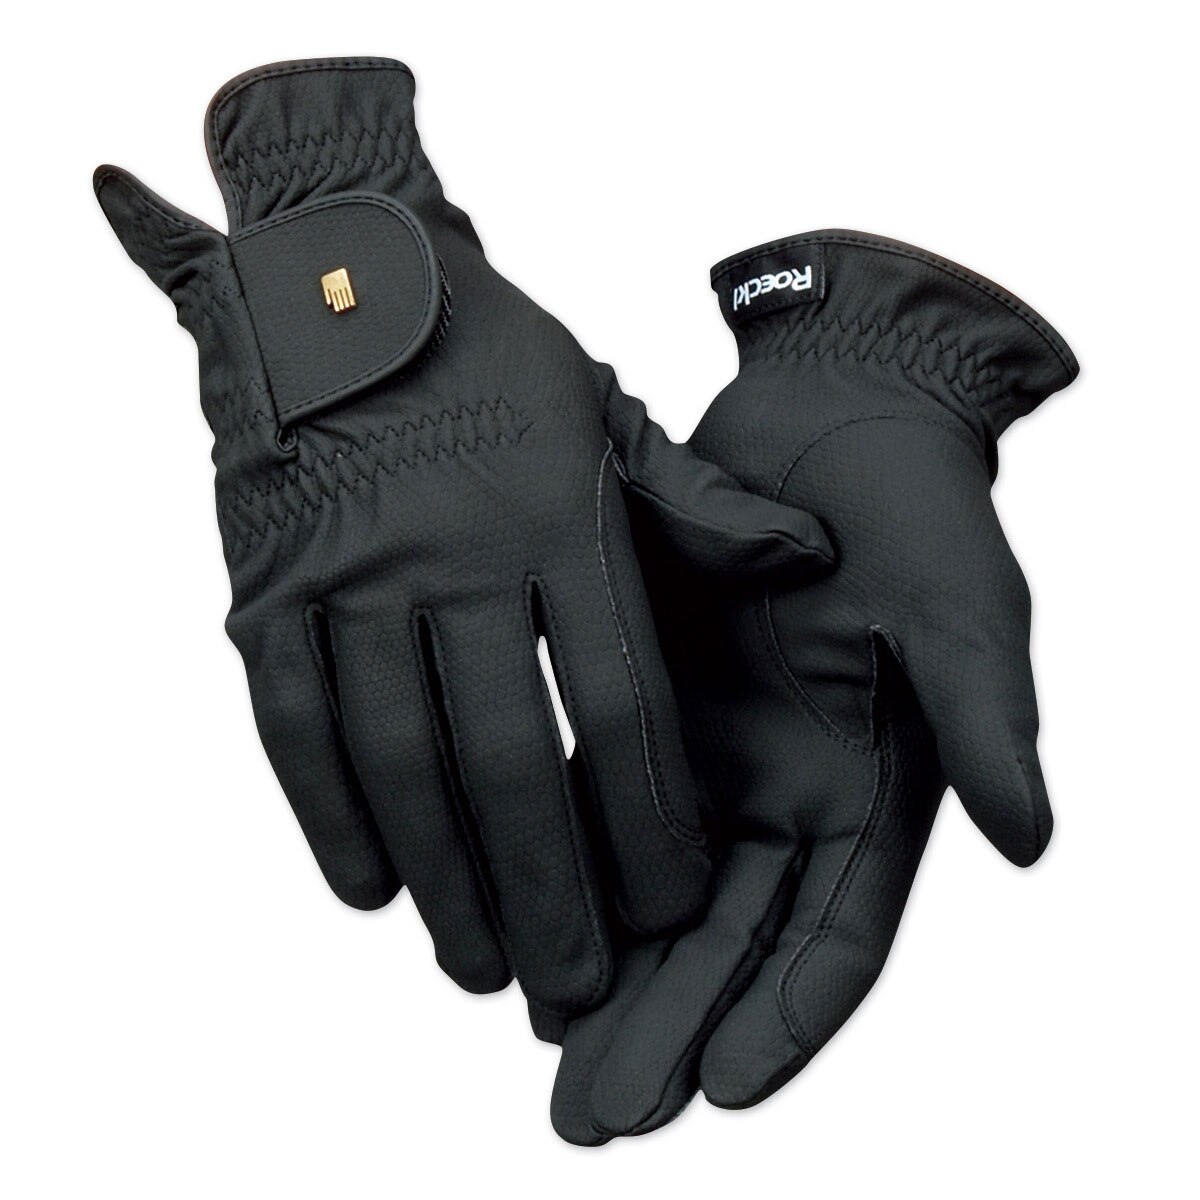 Black Roeckl Roeck-Grip Chester Horse Riding Gloves 